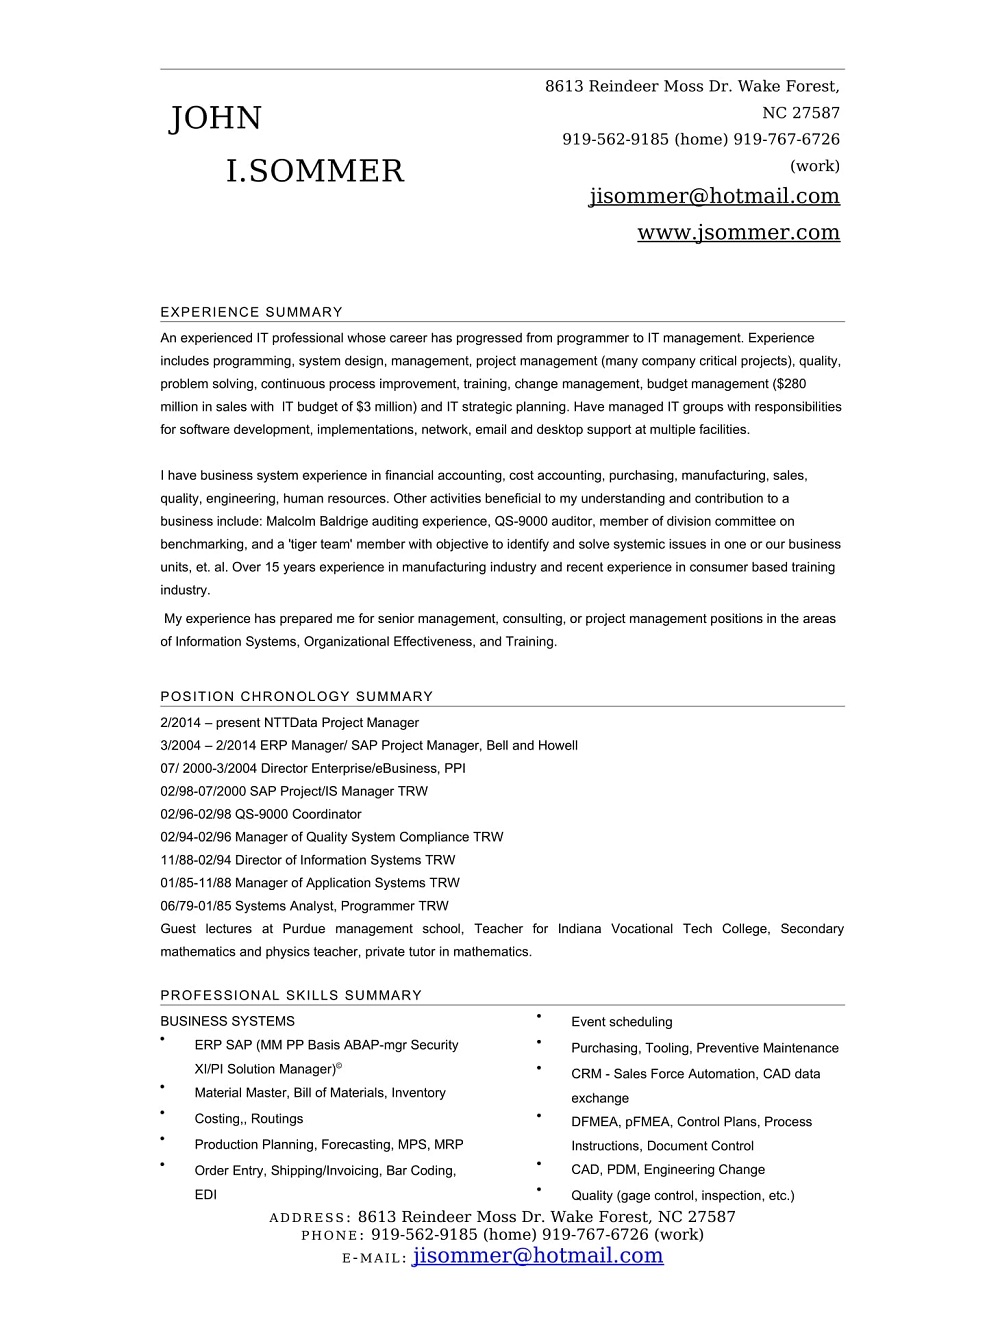 Standard IT Project Manager Resume Template